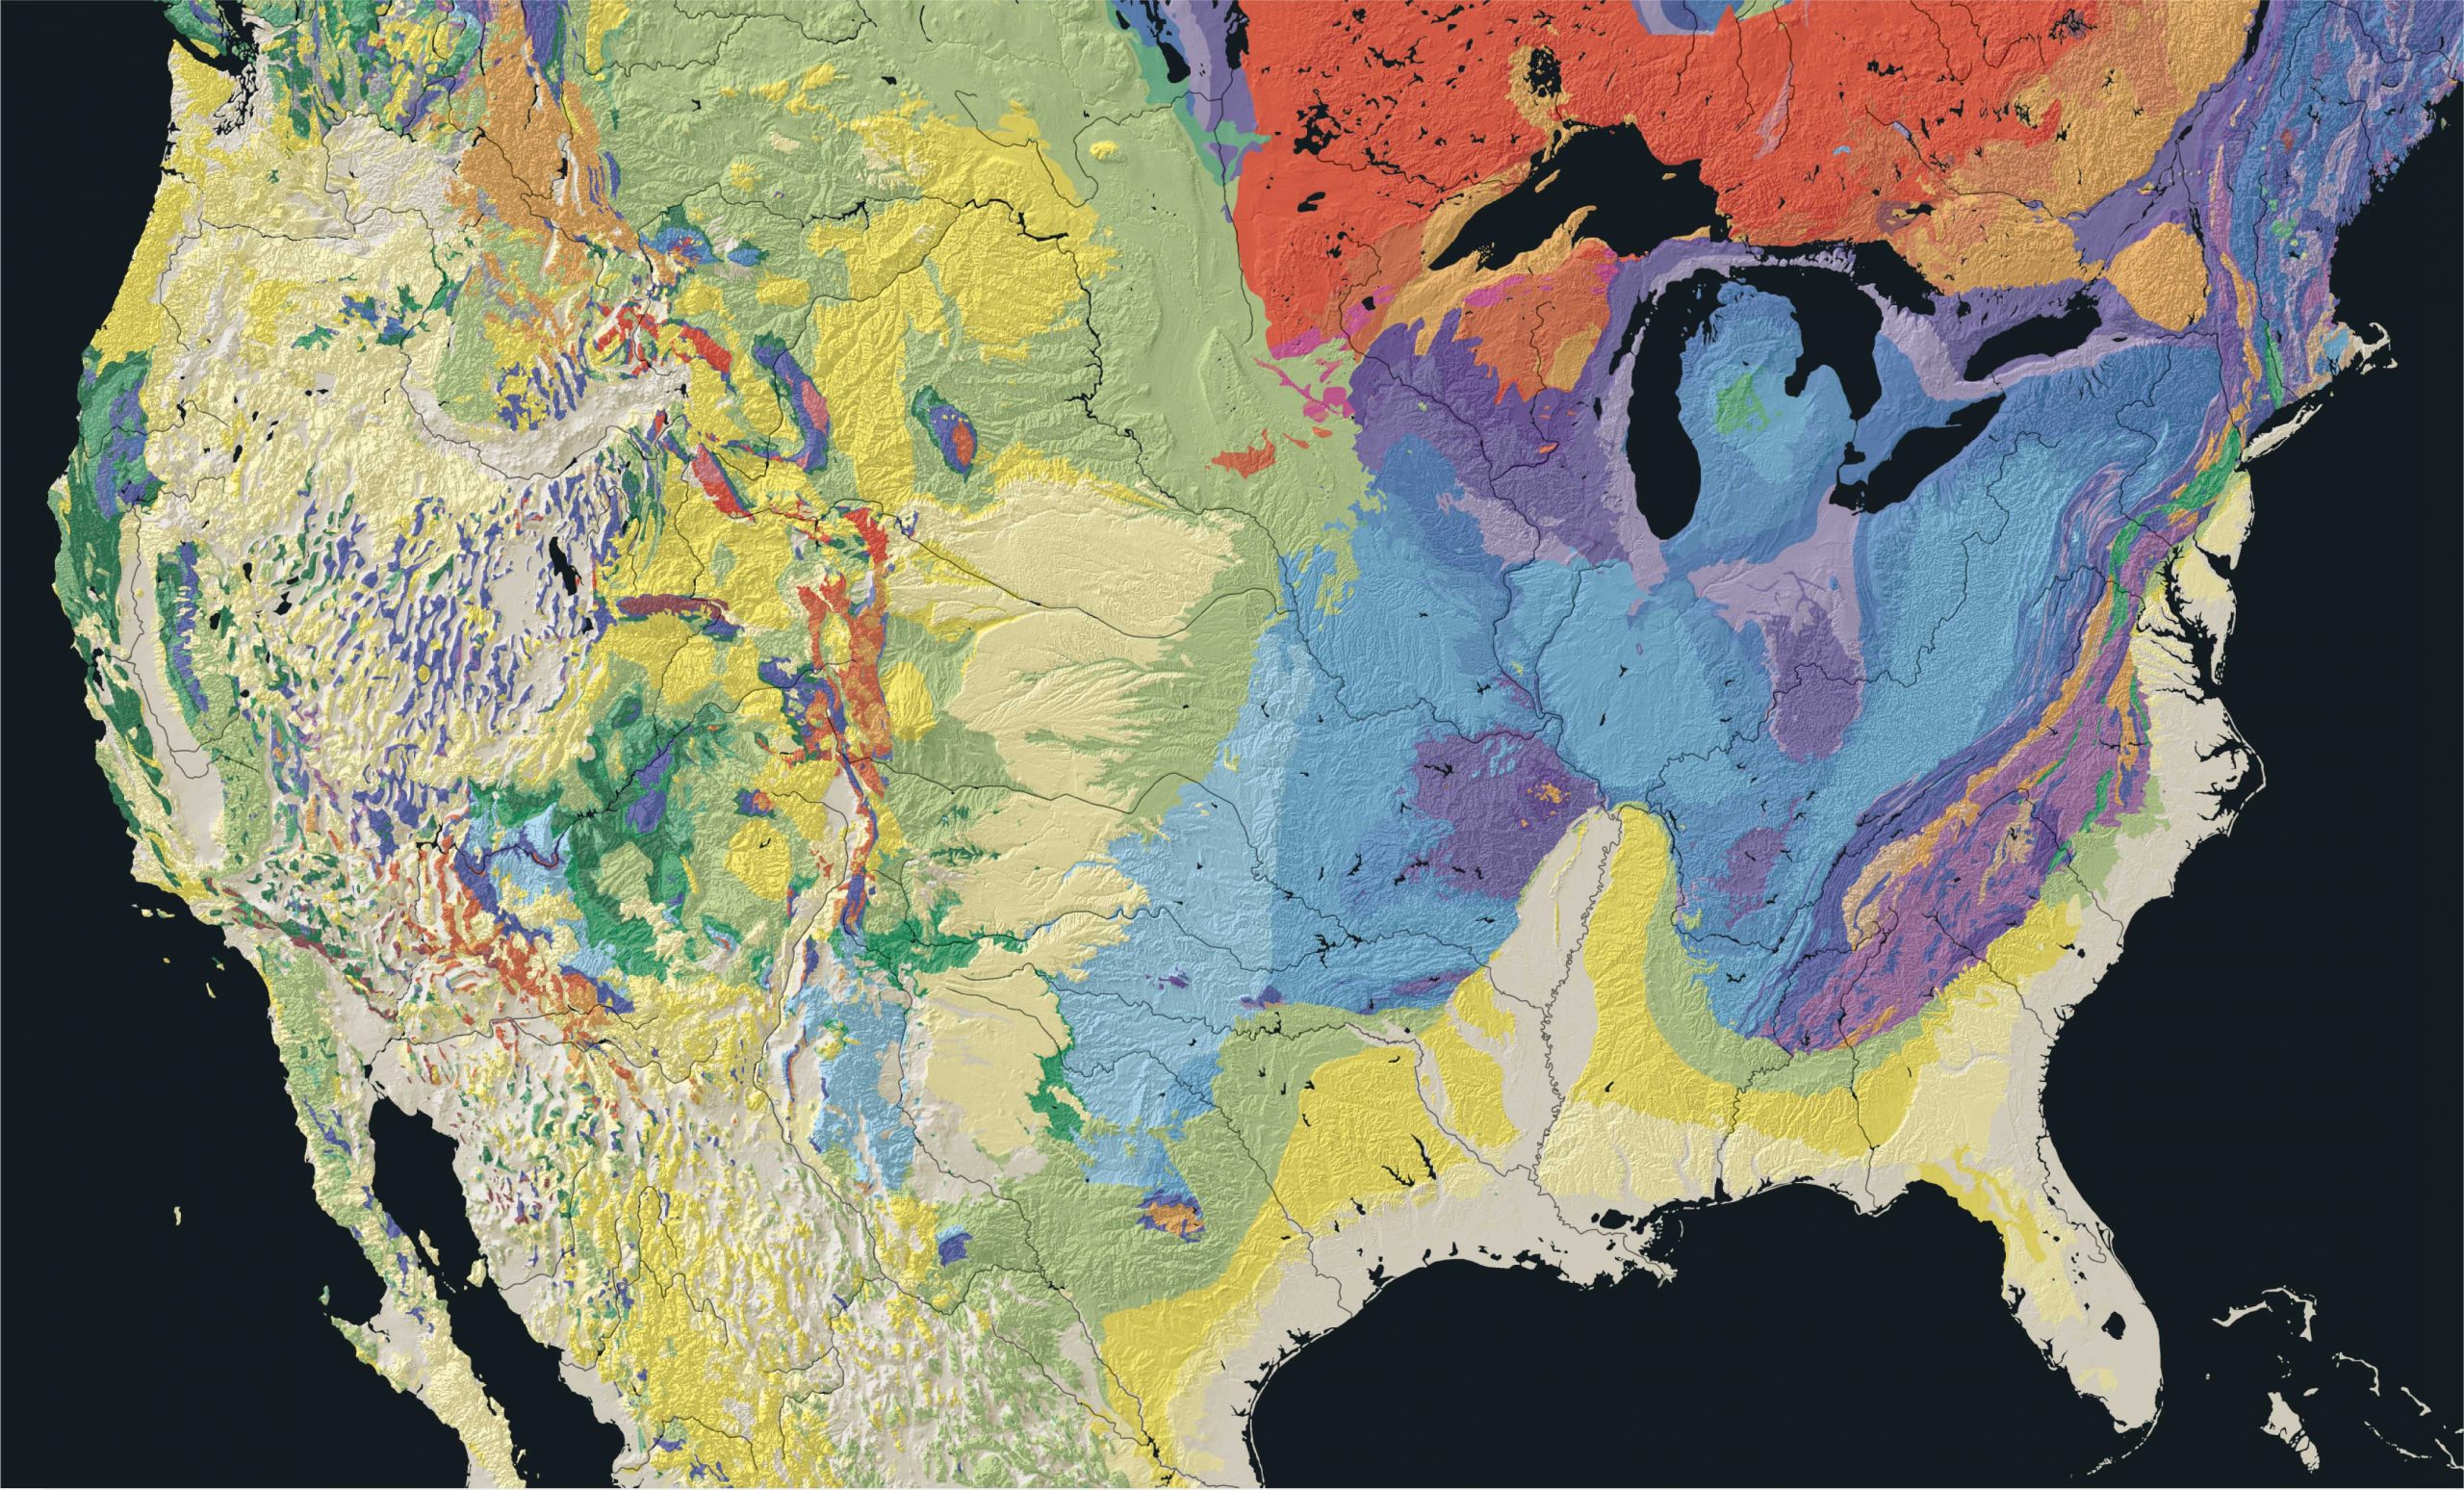 Map with varying colors representing different ages of rocks throughout the United States.